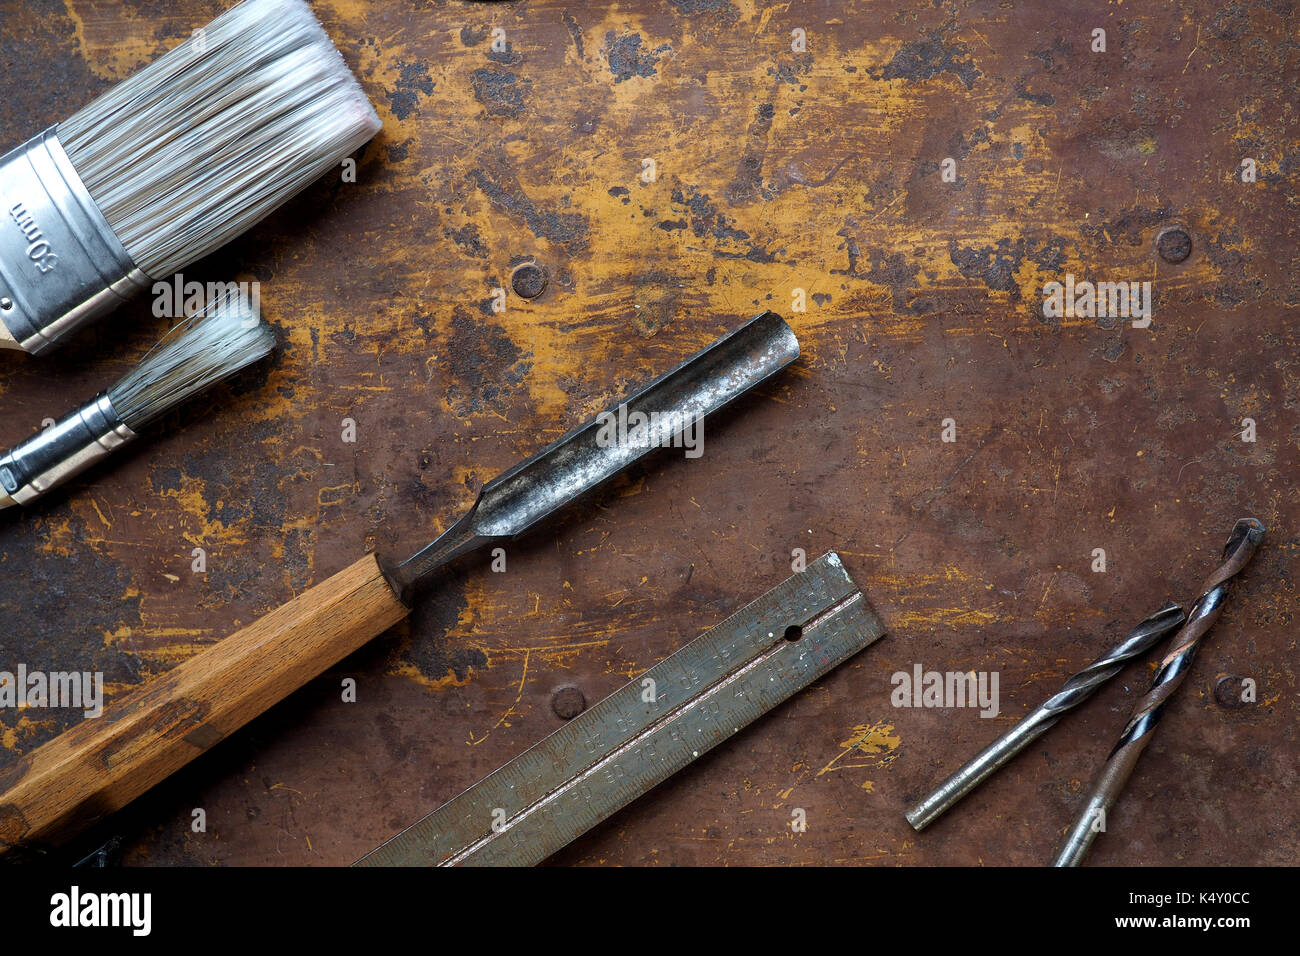 Tools flat lay on textured surface Stock Photo